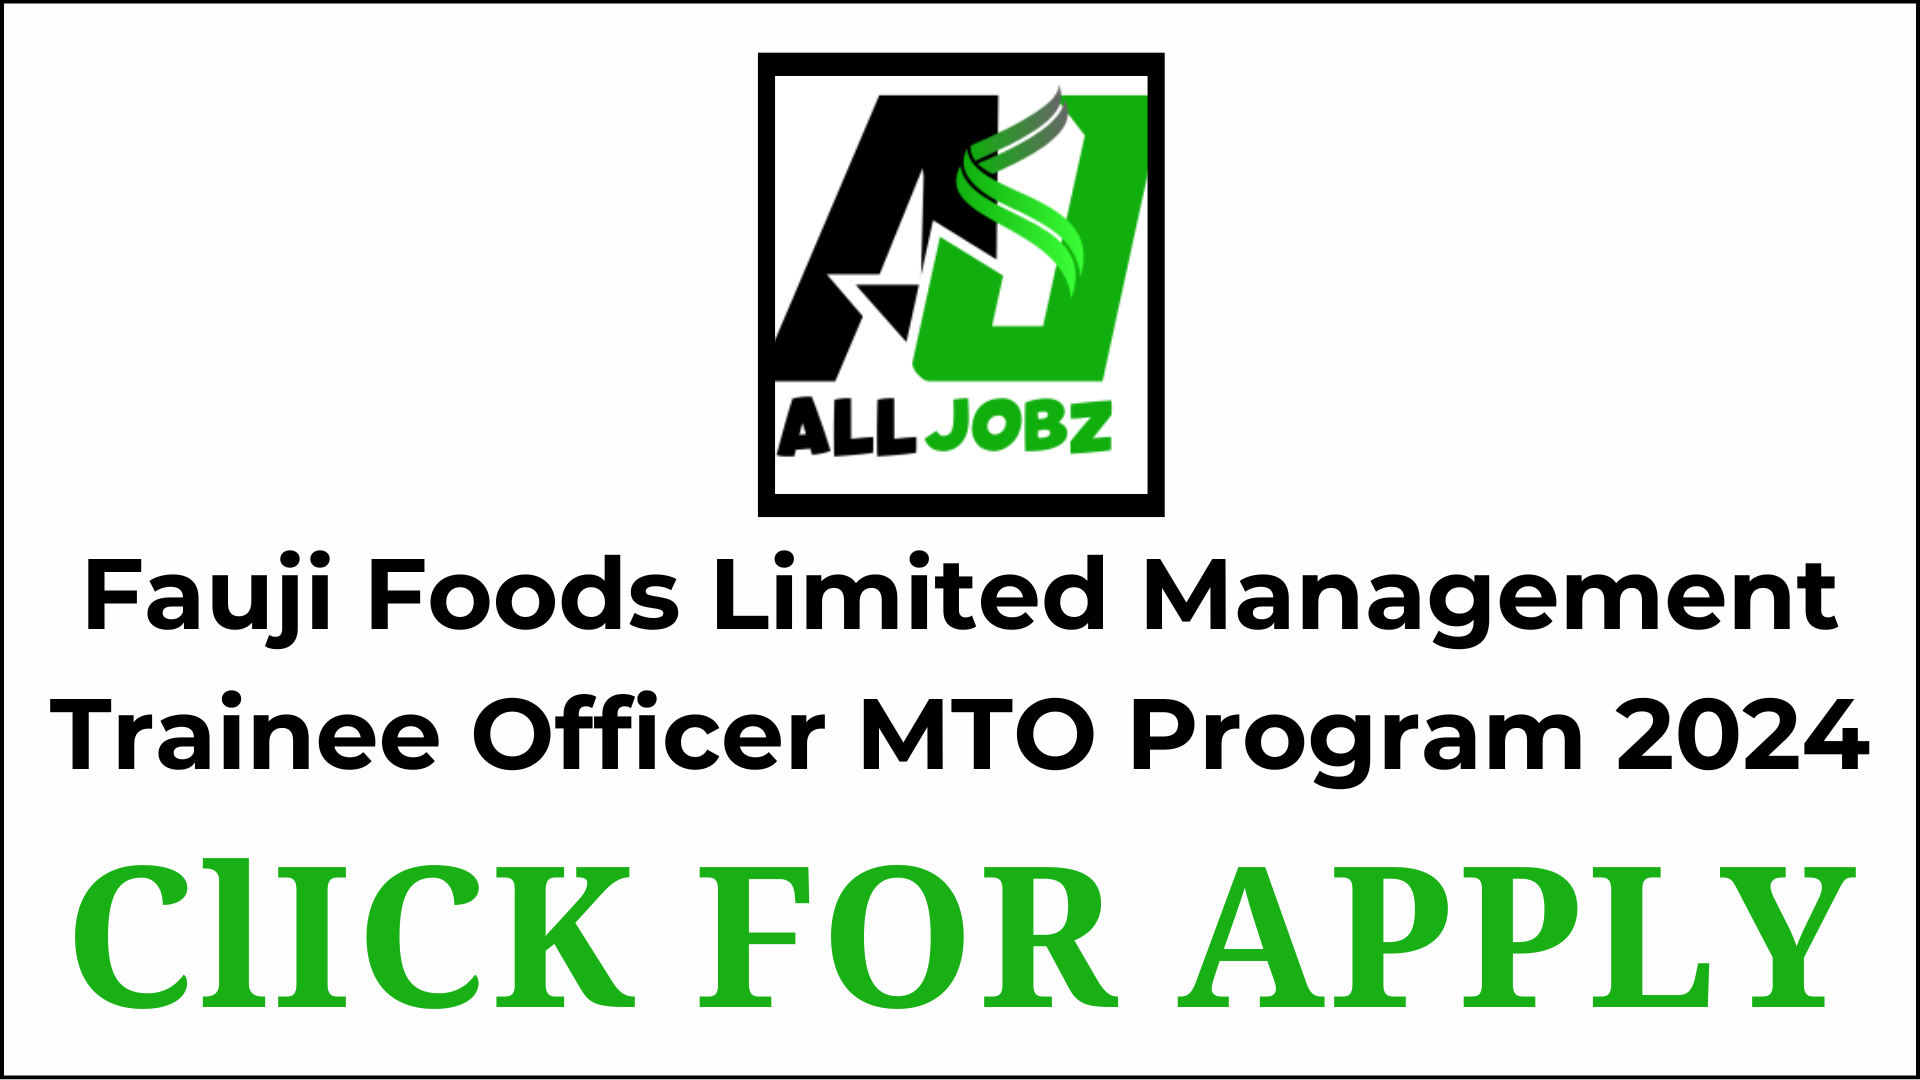 Fauji Foods Limited Management Trainee Officer Mto Program, Fauji Foods Limited Management Trainee Officer Mto Salary, Fauji Foods Limited Management Trainee Officer Mto Job, Fauji Foods Limited Management Trainee Officer Mto Interview, Fauji Foods Jobs, Ffl Management Trainee Officer Jobs Online Apply, Fauji Foods Ffl Management Trainee Officer, Ffl Management Trainee Officer Job Description, Ffl Management Trainee Program 2024, Fauji Foods Contact Number,